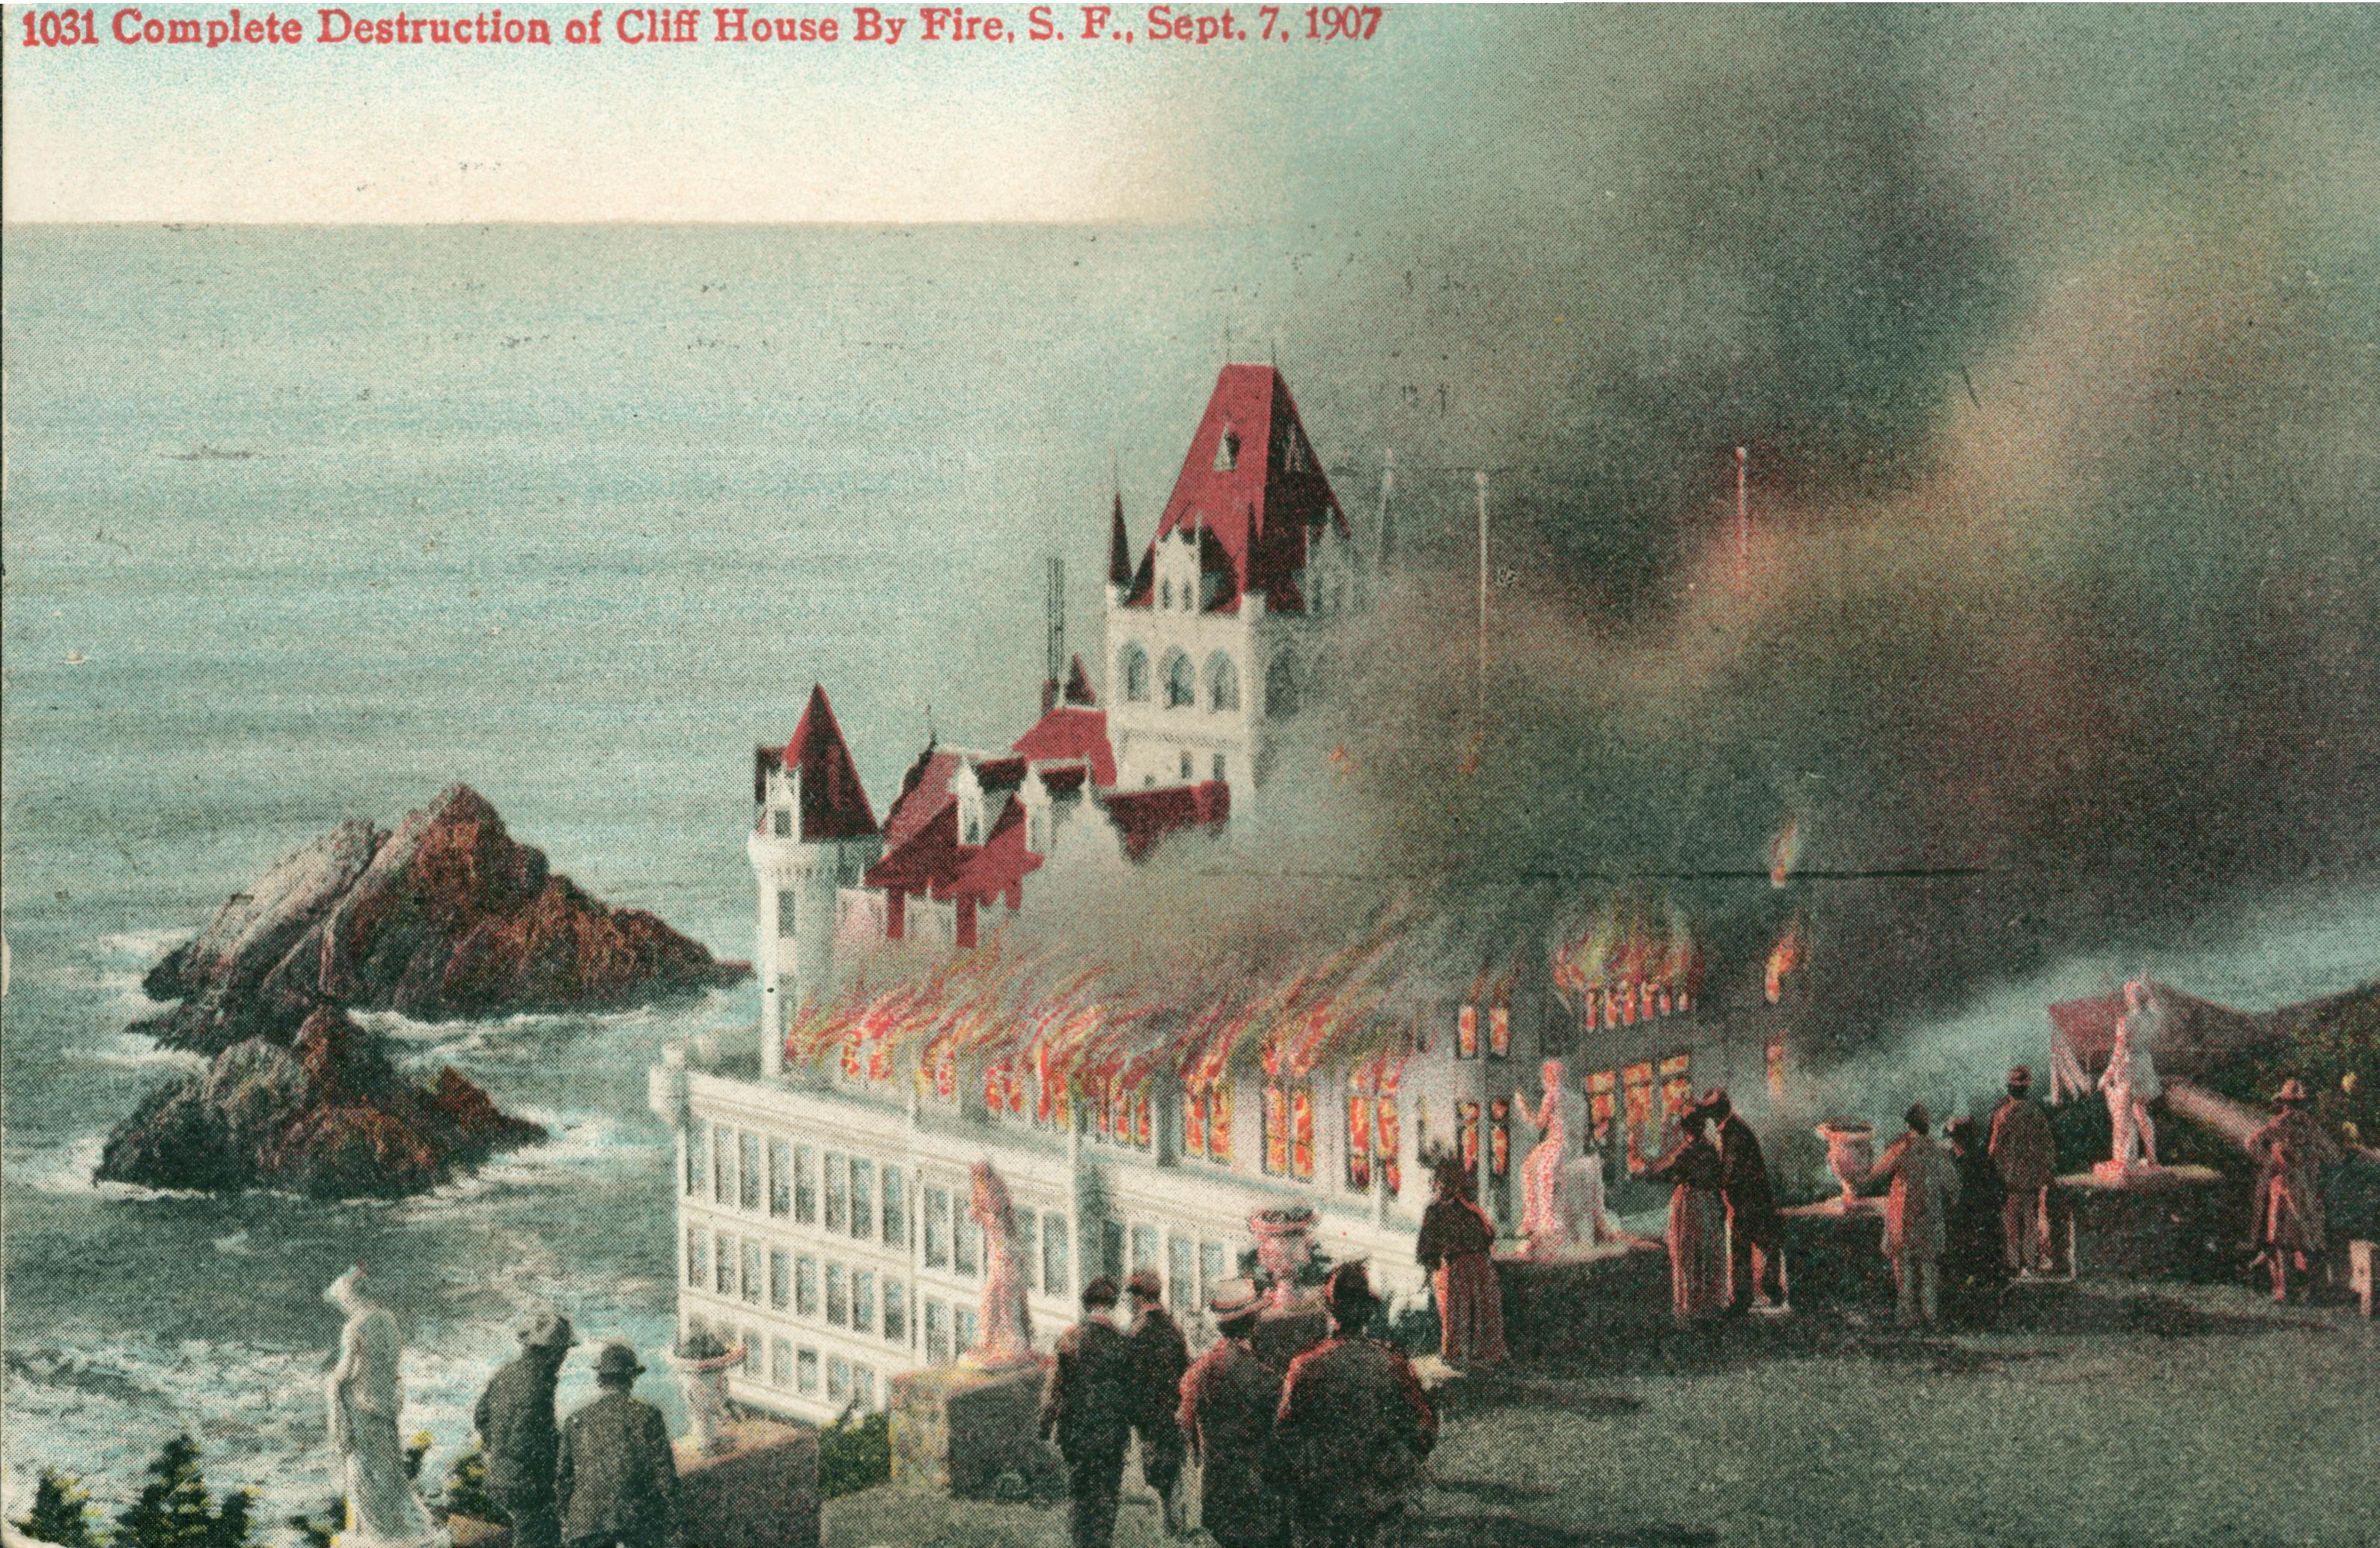 Shows the Cliff House on fire with several individuals looking on.